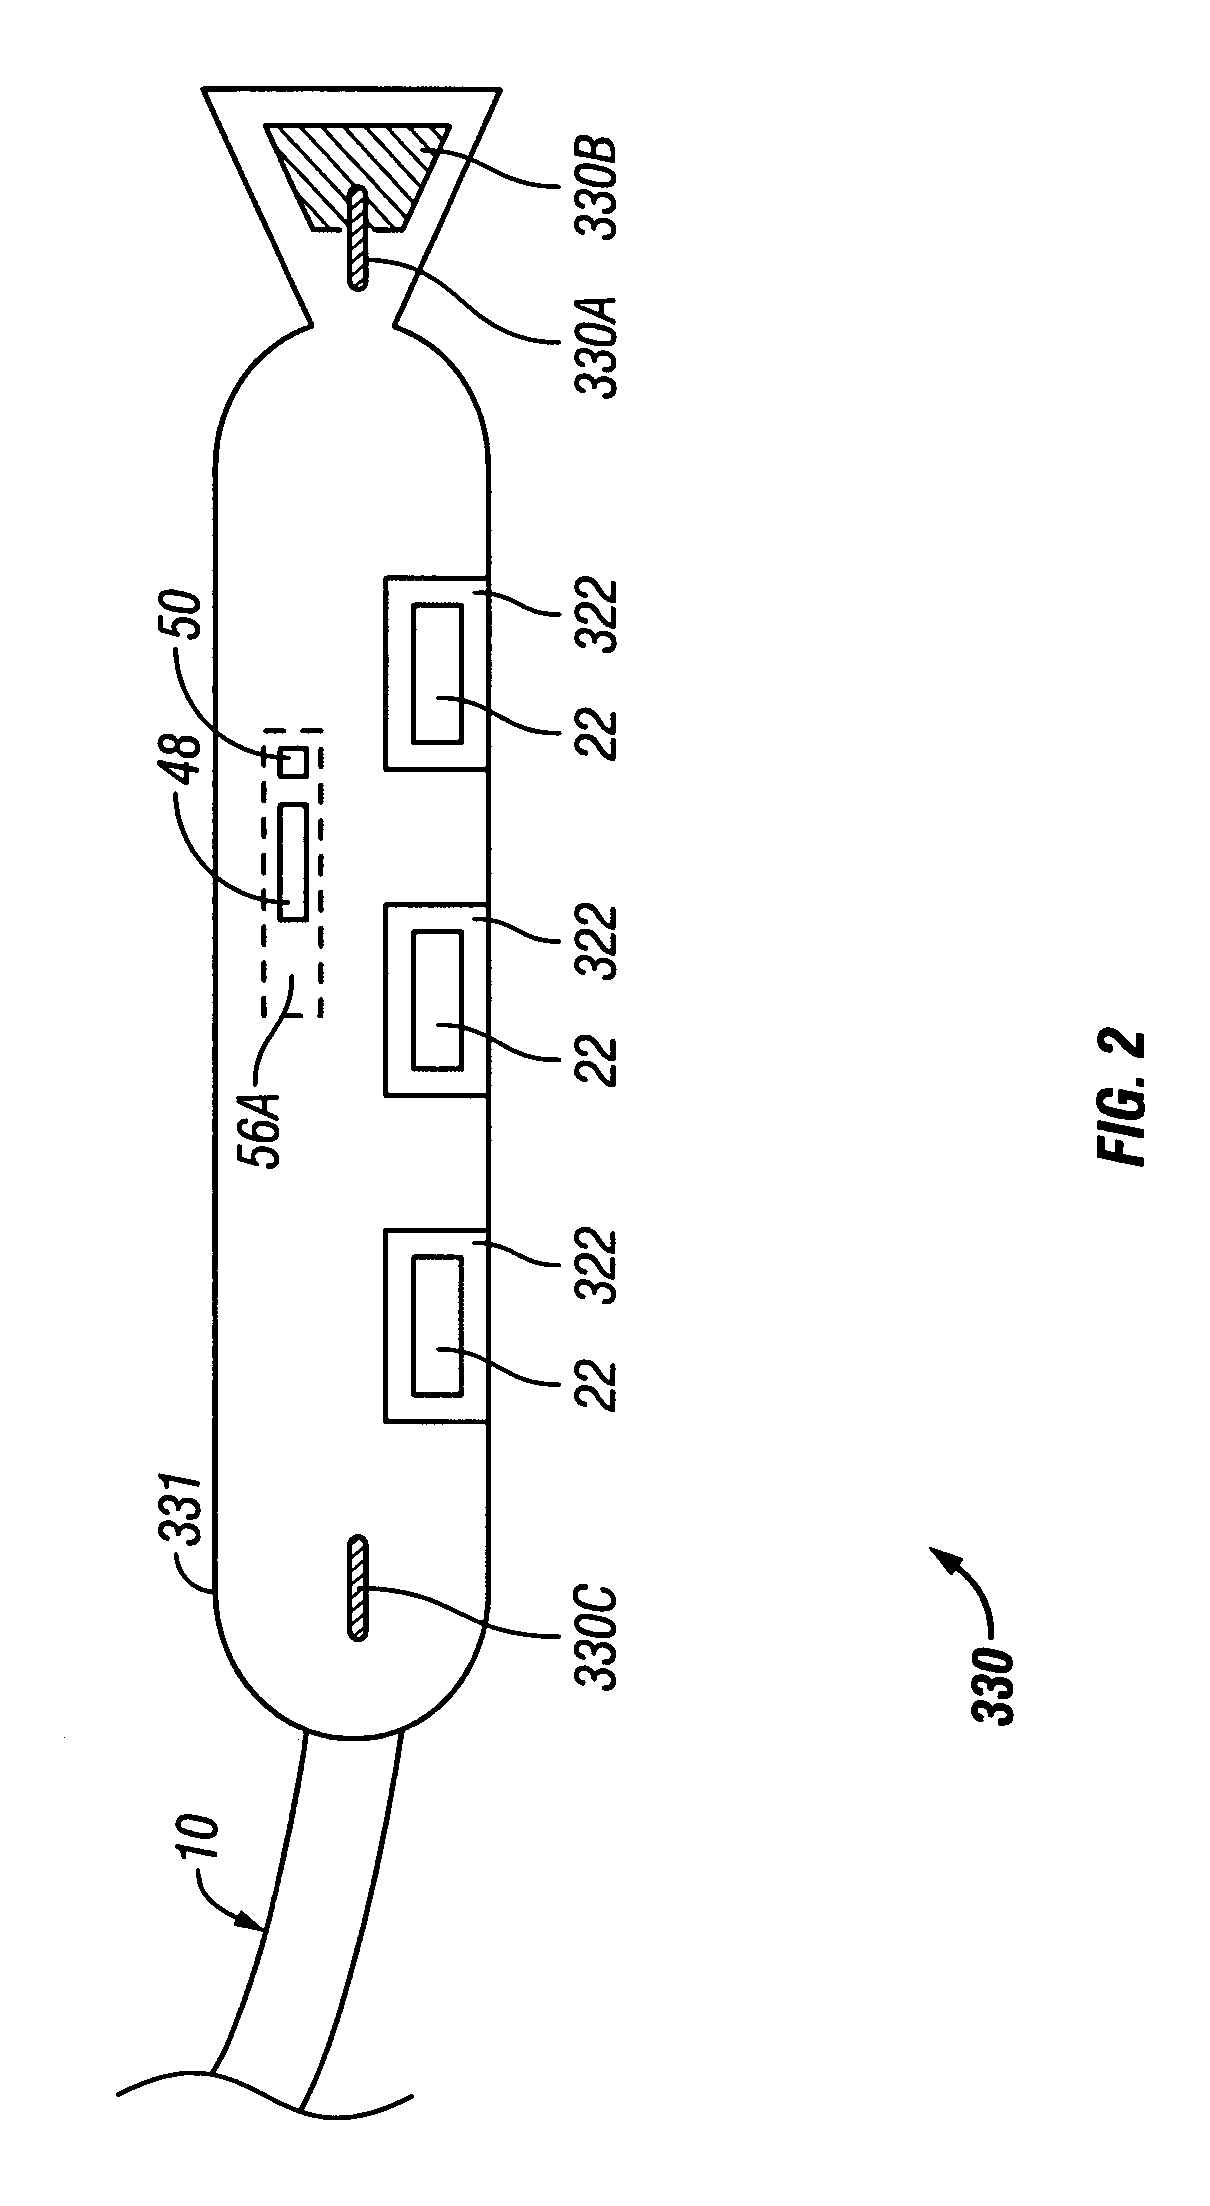 Seismic source and source array having depth-control and steering capability